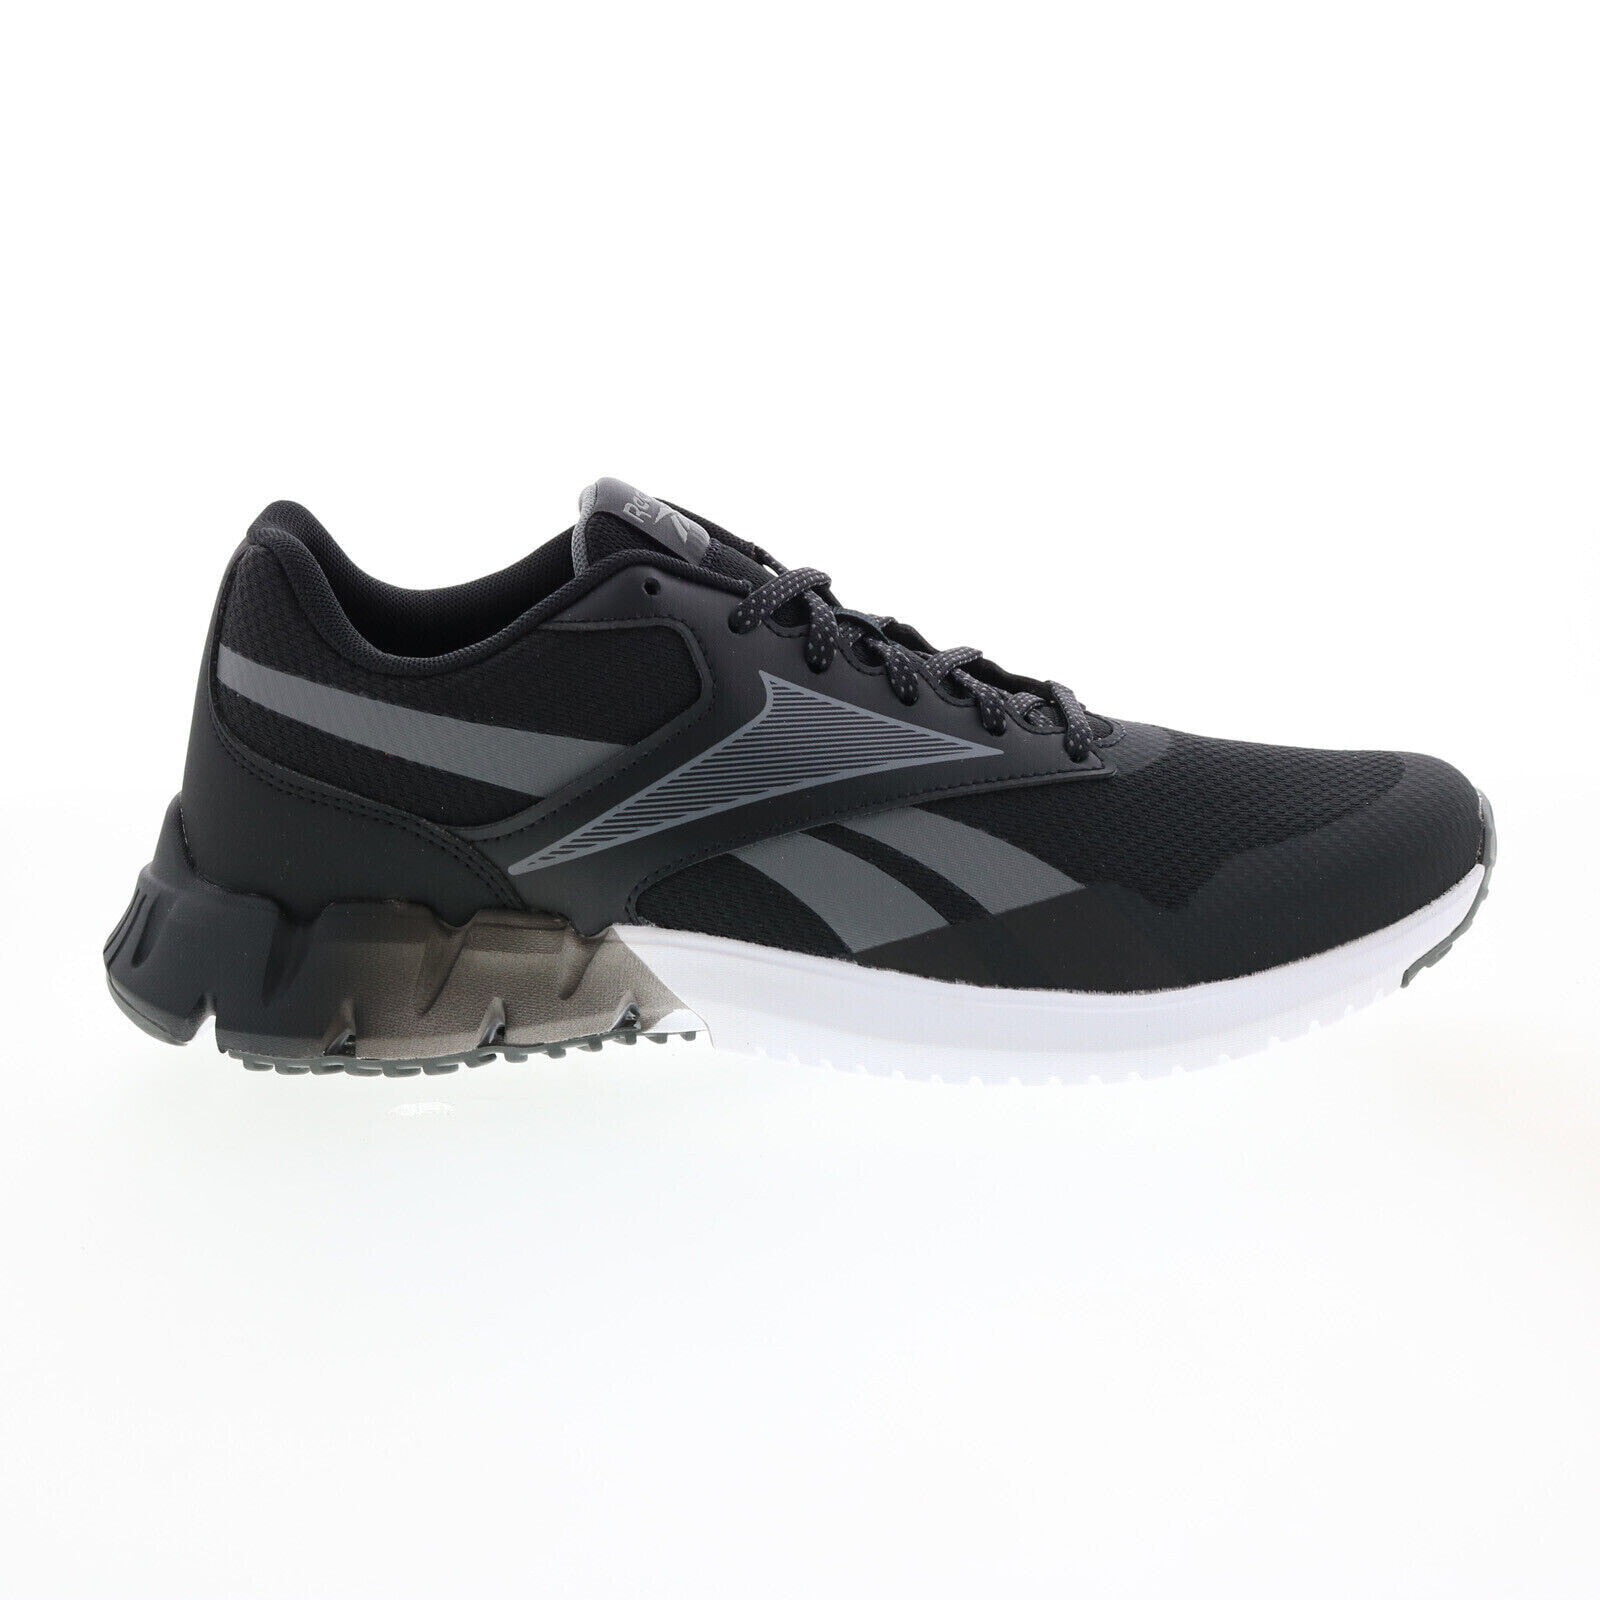 Reebok Ztaur Run GY7719 Mens Black Canvas Lace Up Athletic Running Shoes 9